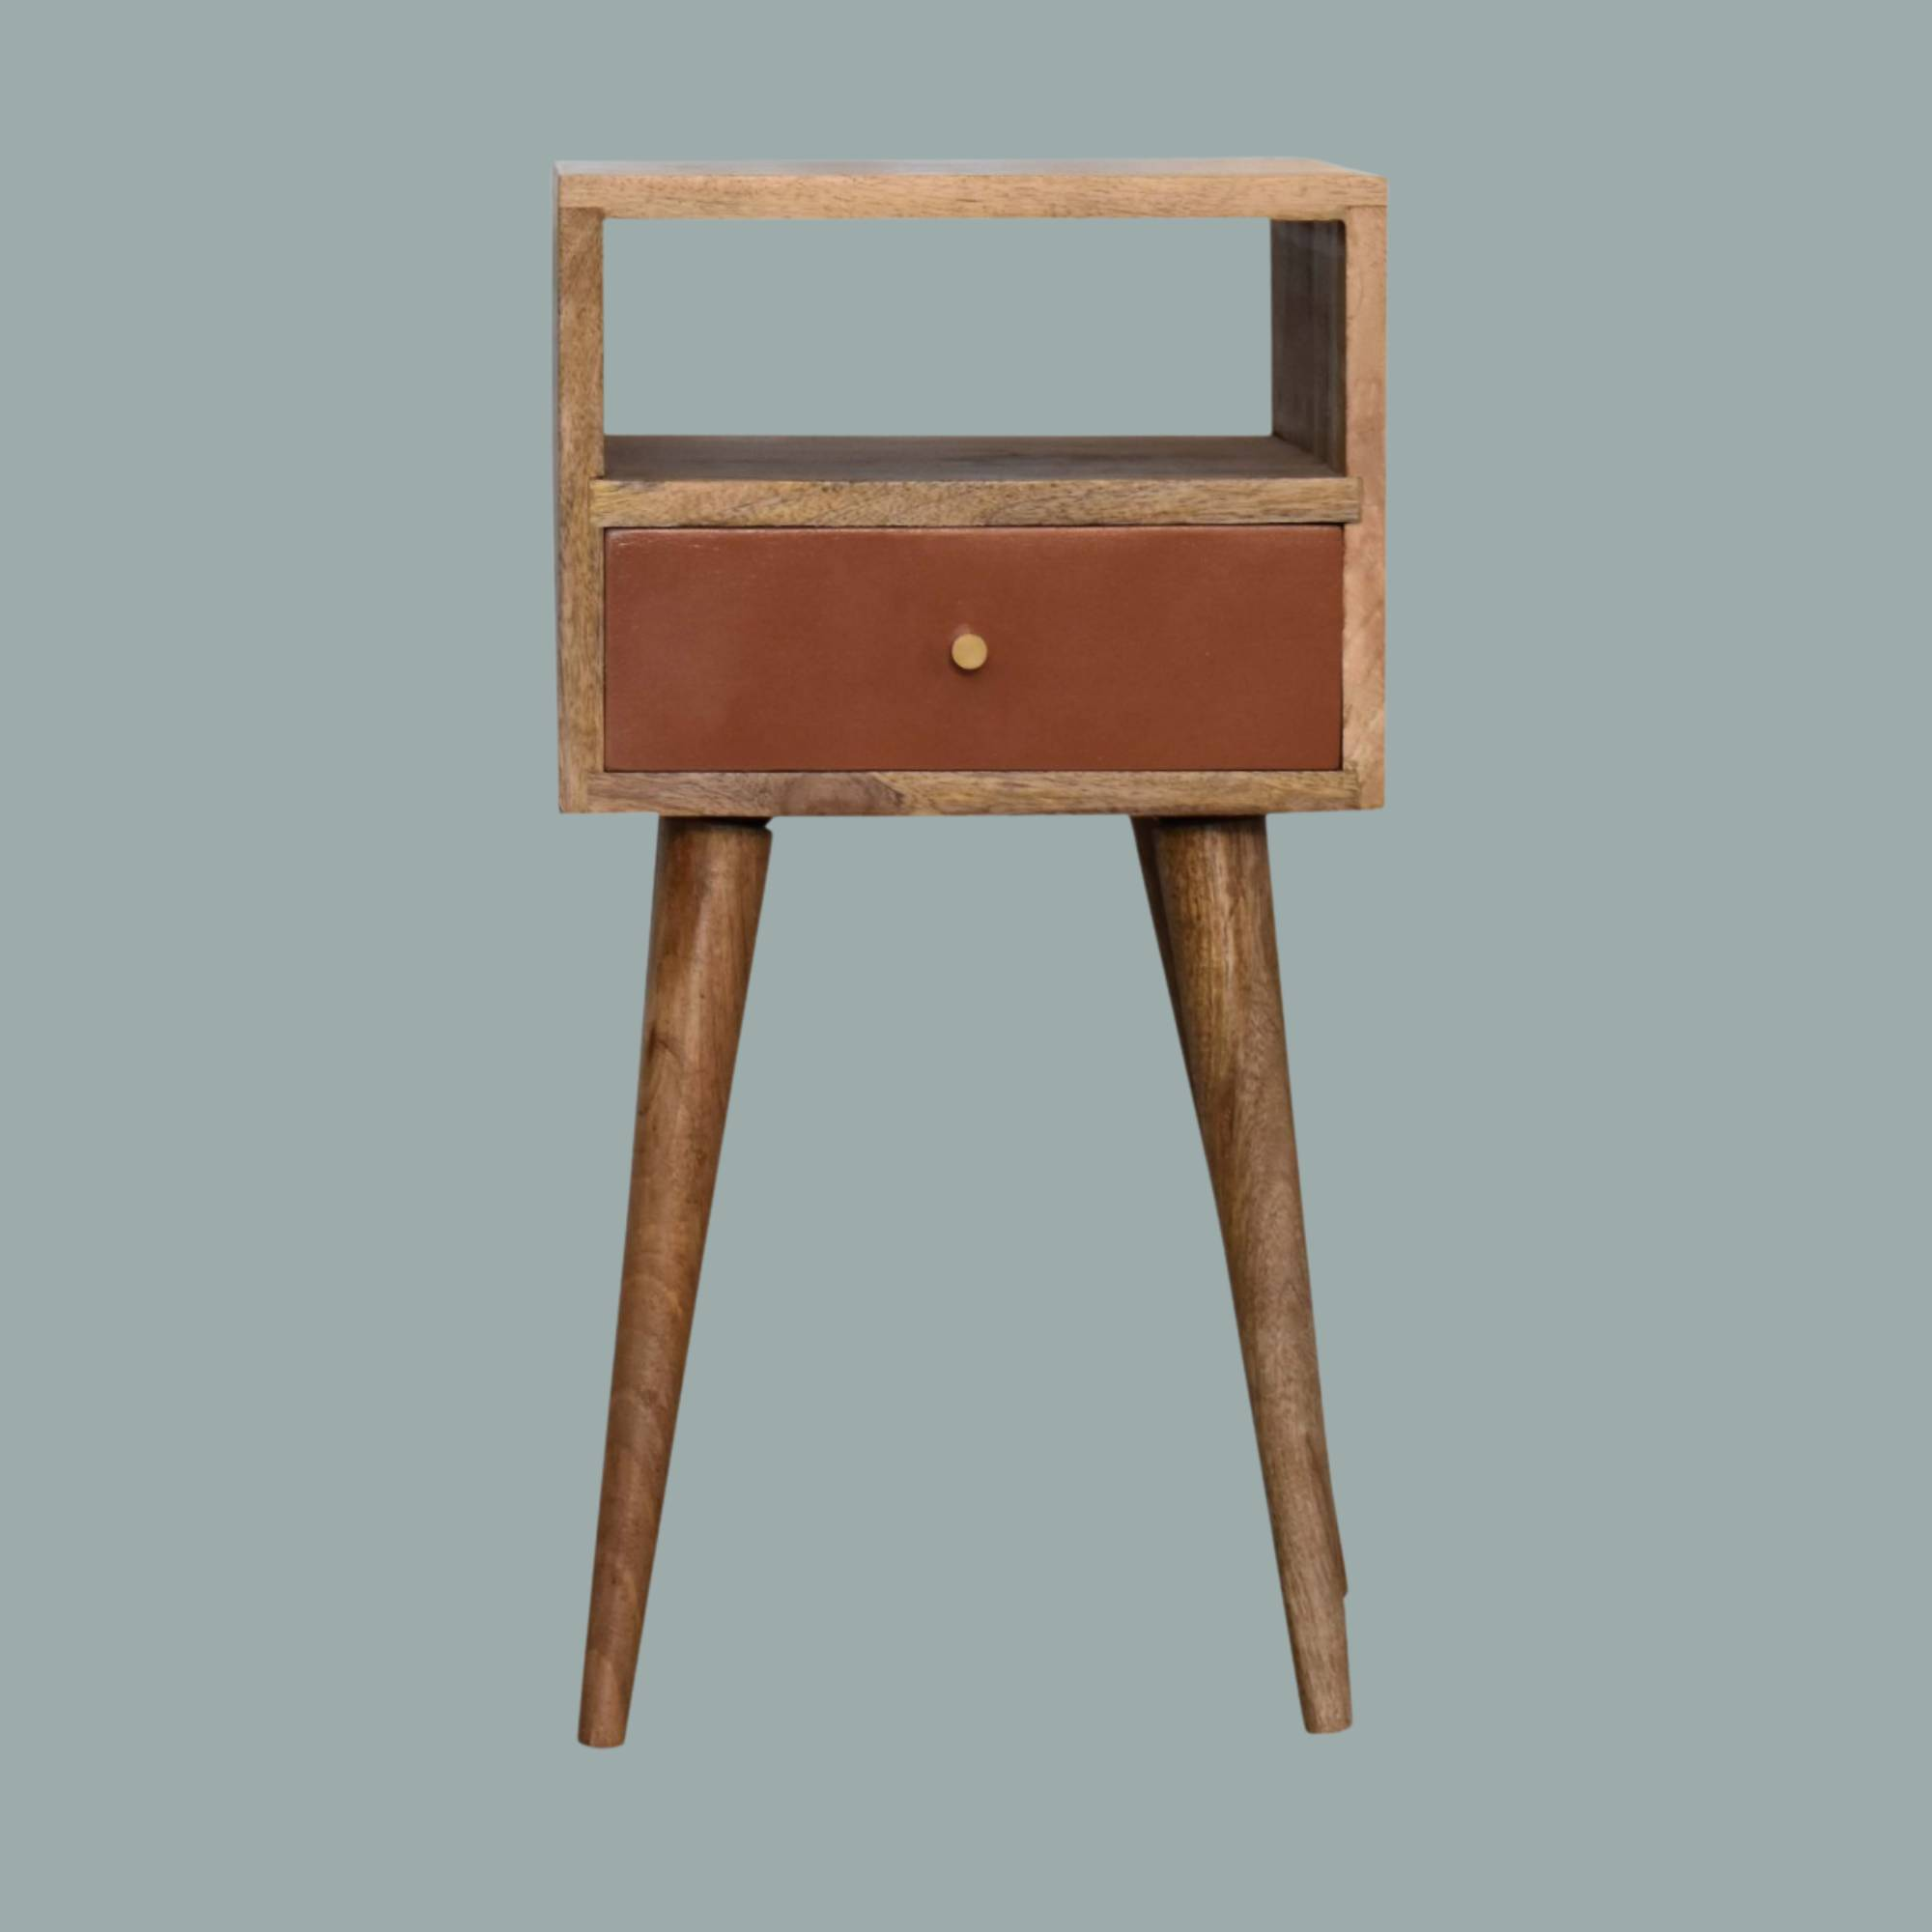 ELLY Brick Red Hand Painted Small Bedside Table | malletandplane.com